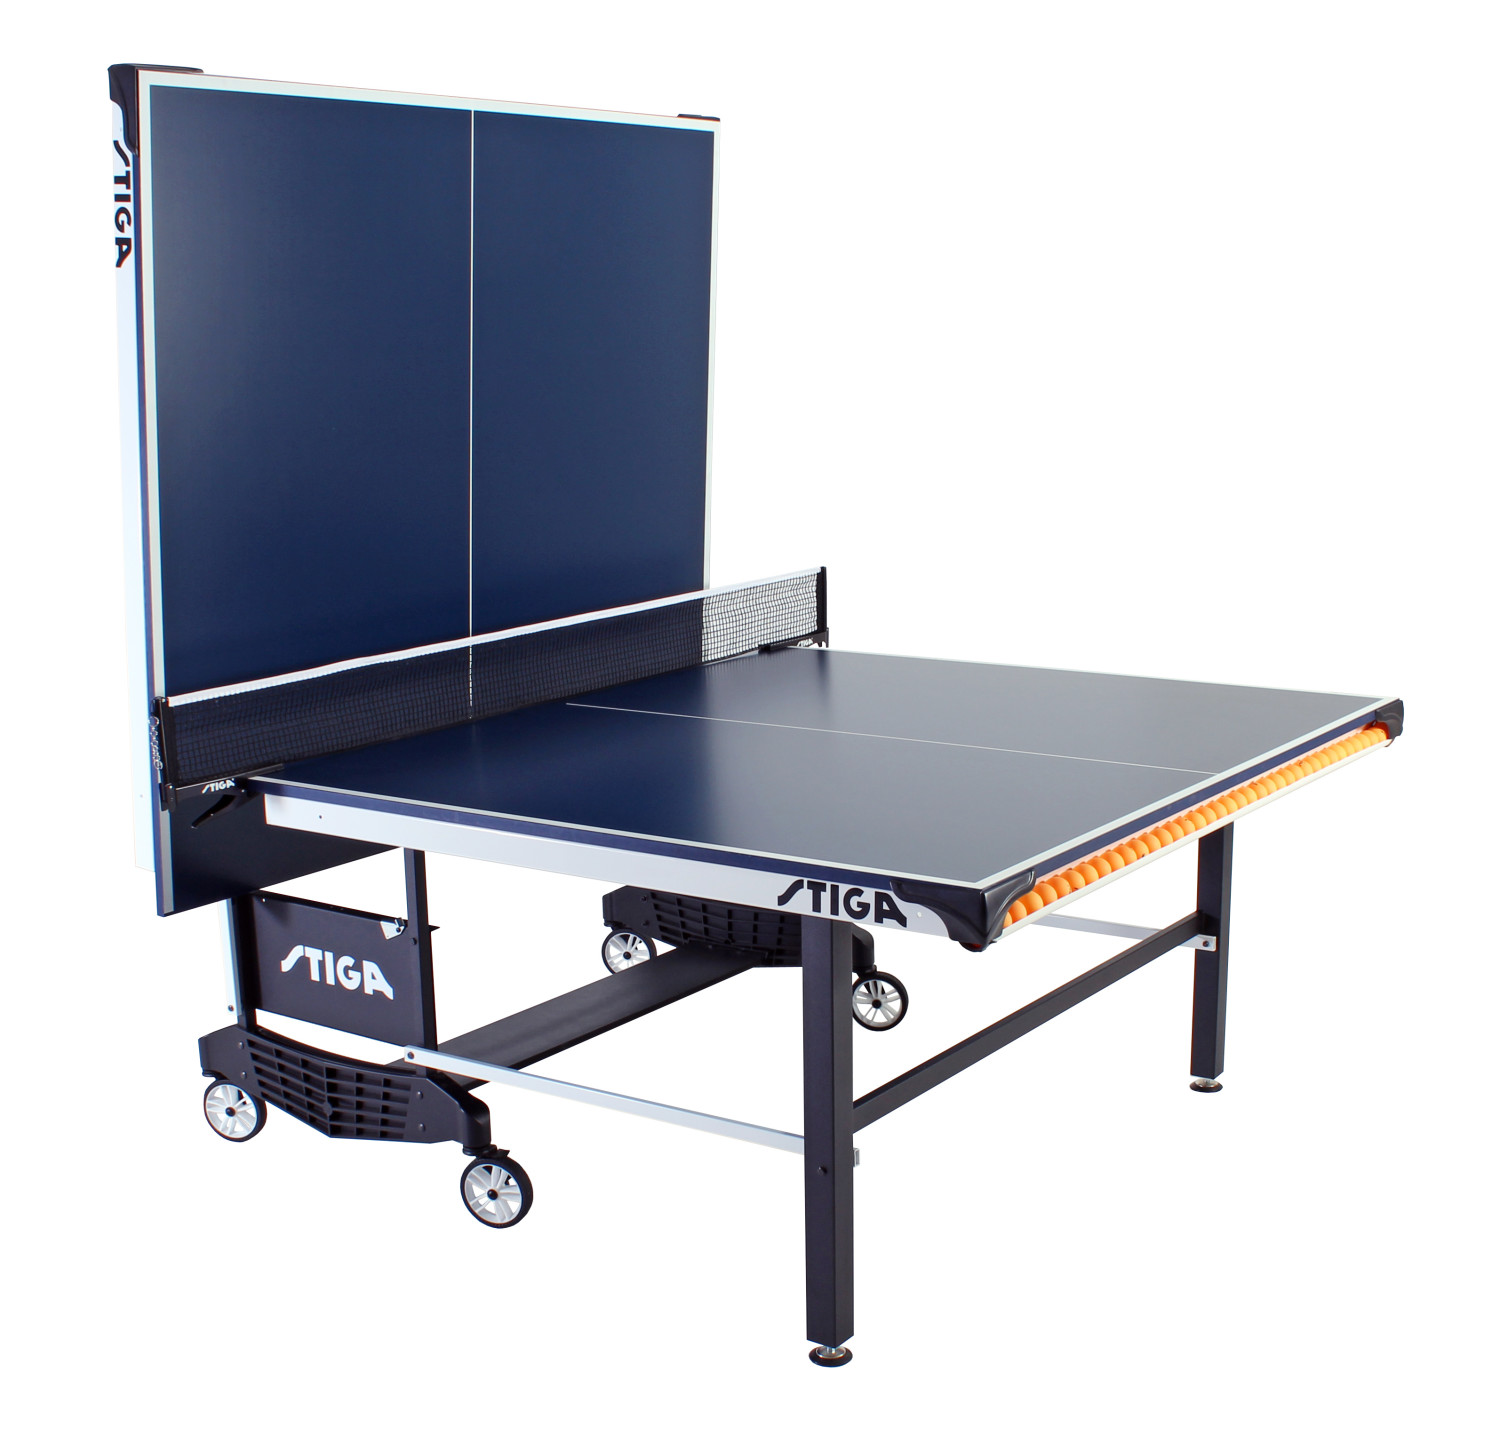 STIGA Tournament Series 385 Indoor Competition-Ready Table Tennis Table - image 4 of 8